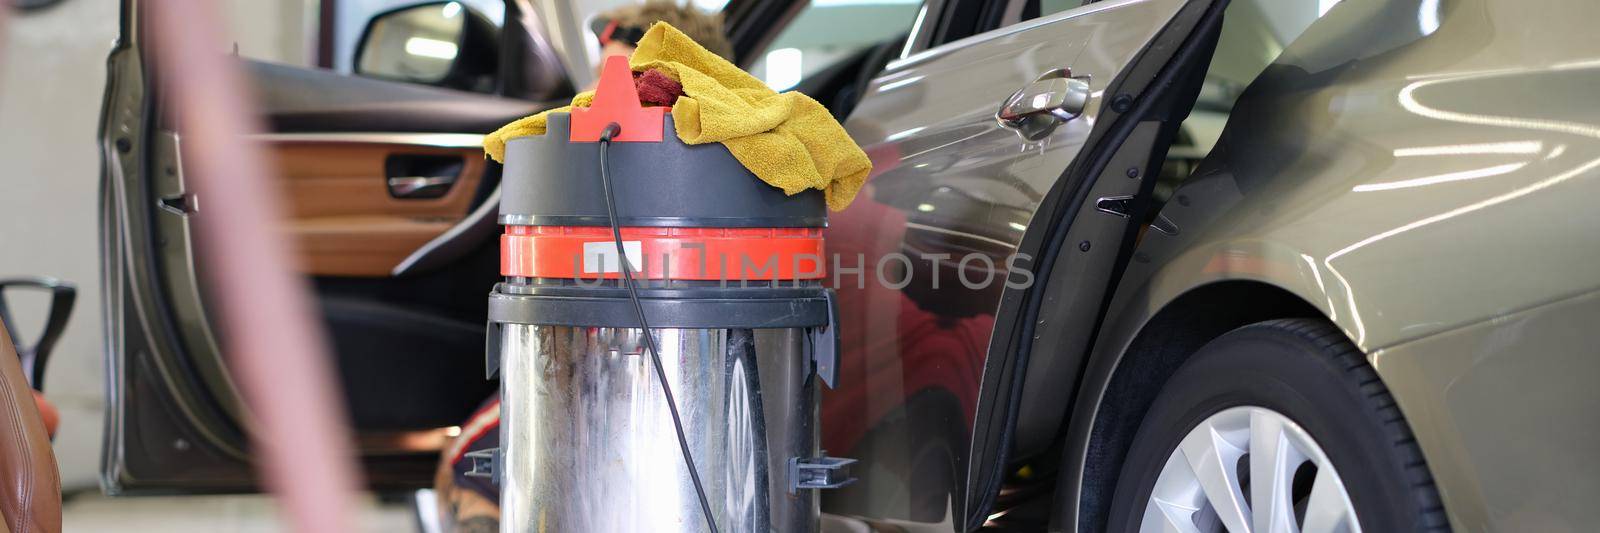 Modern equipment for car detailing, close-up. A range of services for the care of the interior and exterior of the car